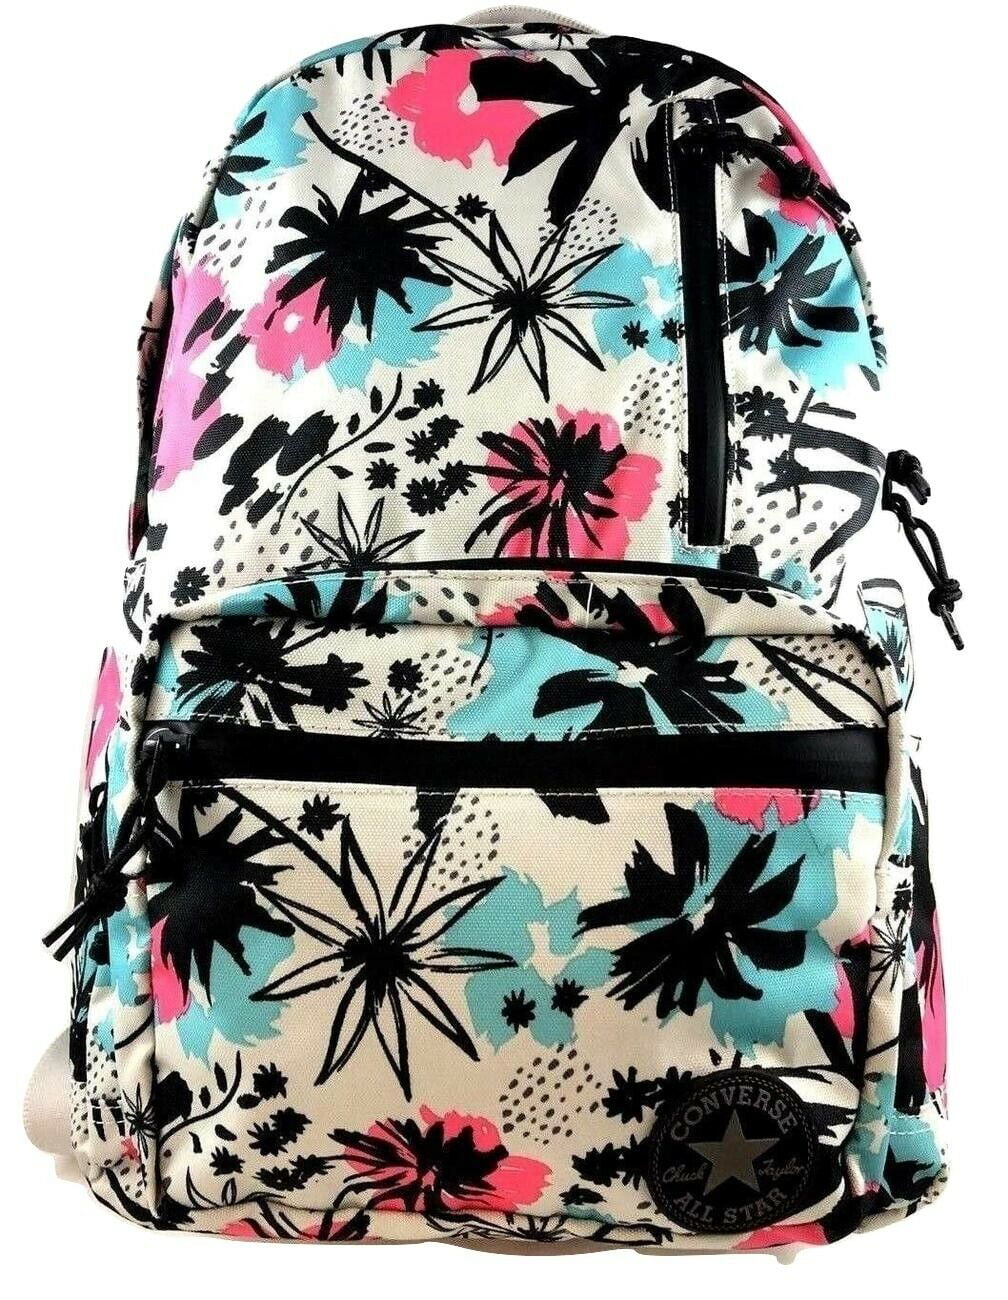 converse floral backpack